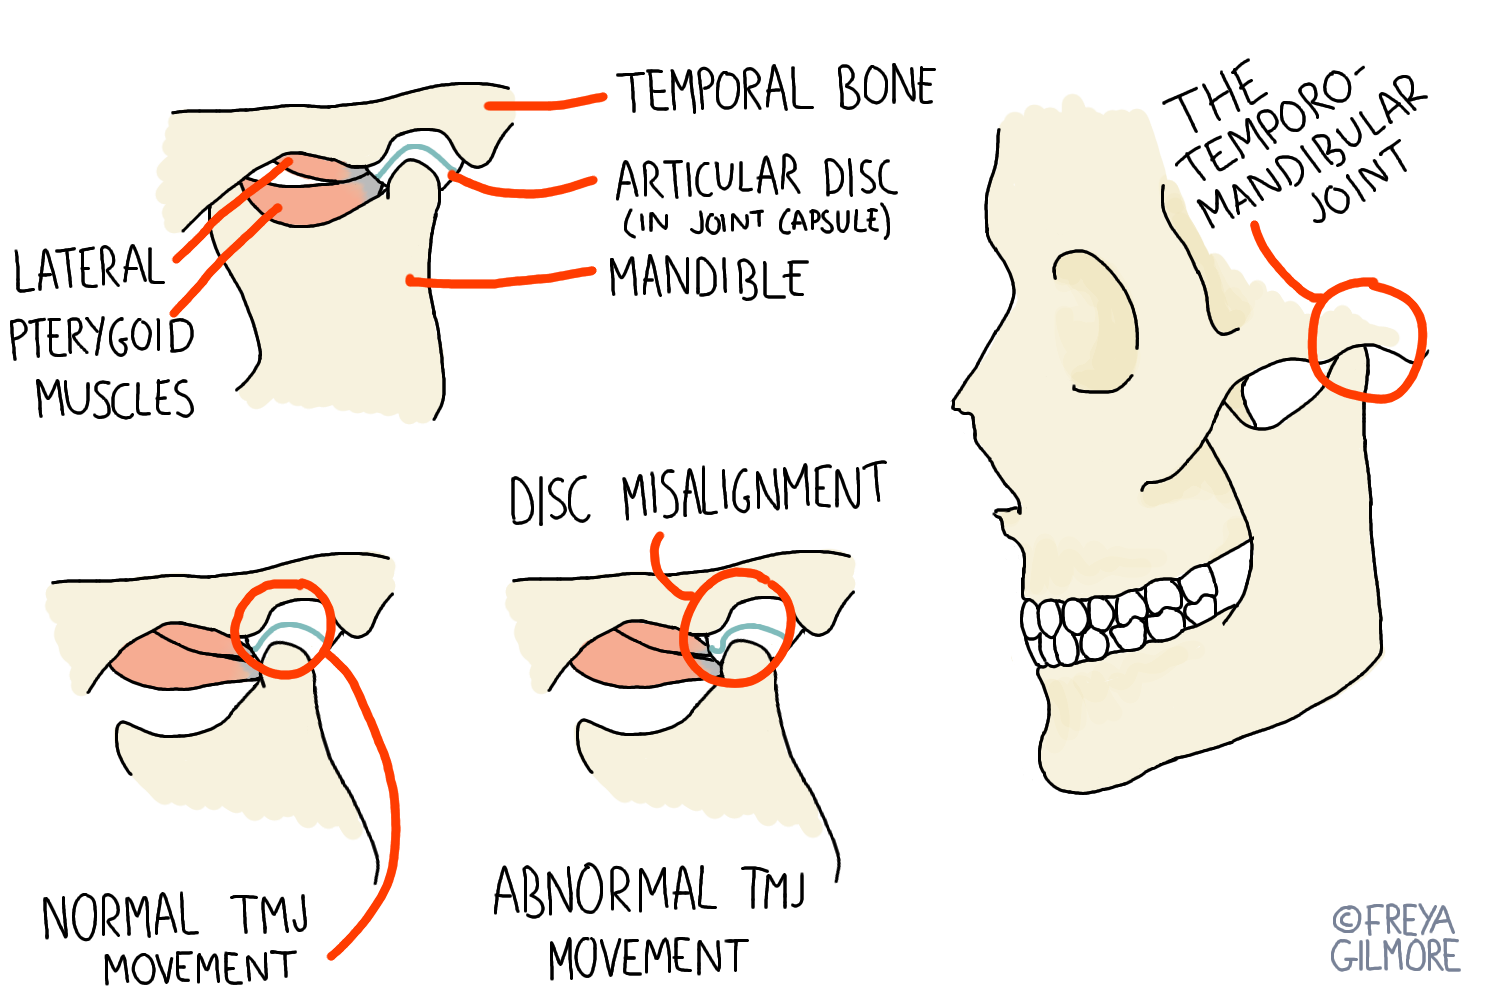 TMJ: Jaw Pain and Clicking